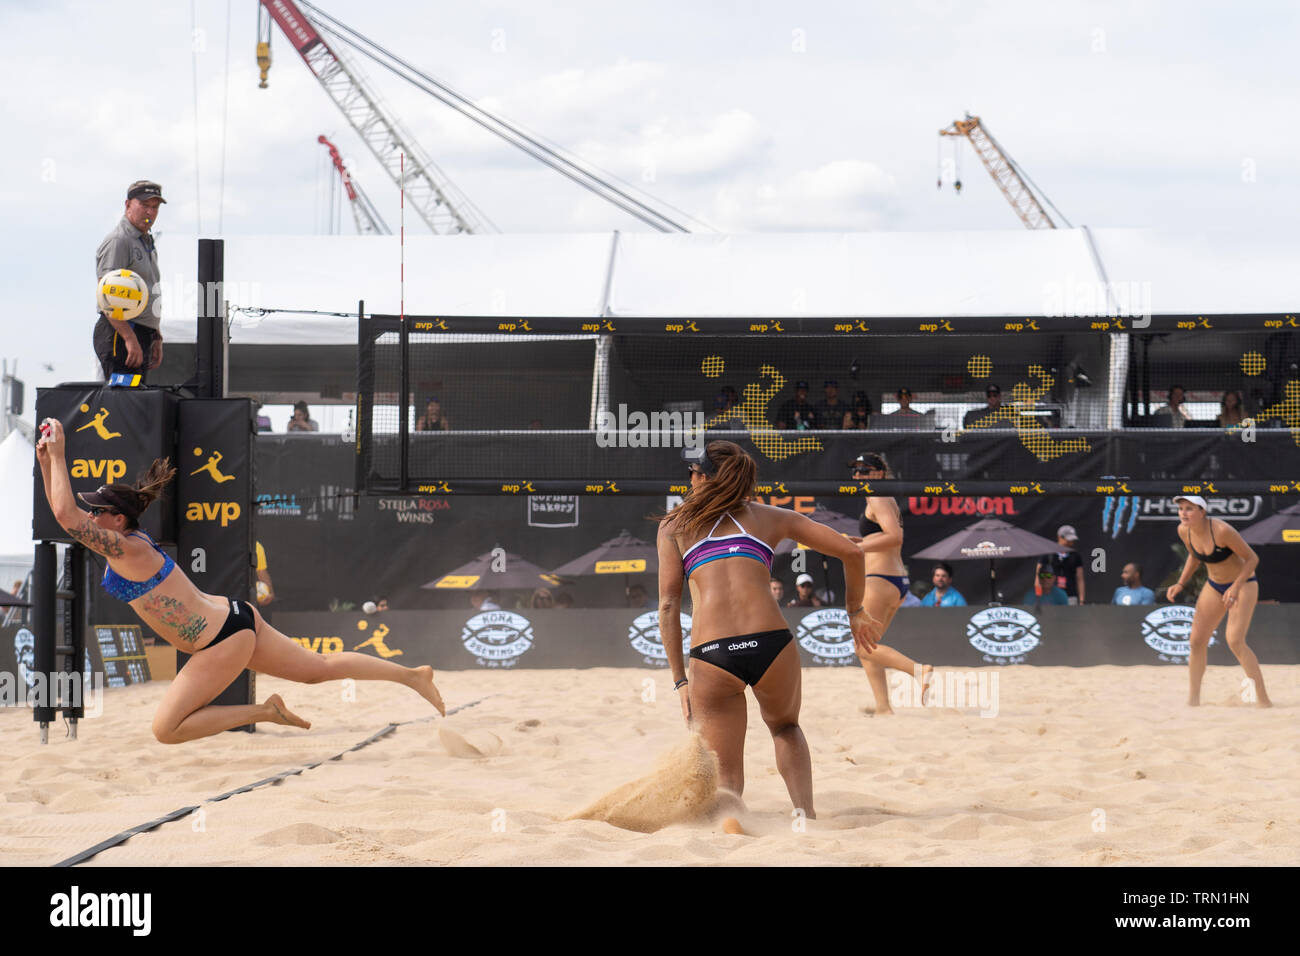 Karissa Cook/Jace Pardon competing against Caitlin Ledoux/Geena Urango  in the 2019 New York City Open Beach Volleyball Stock Photo